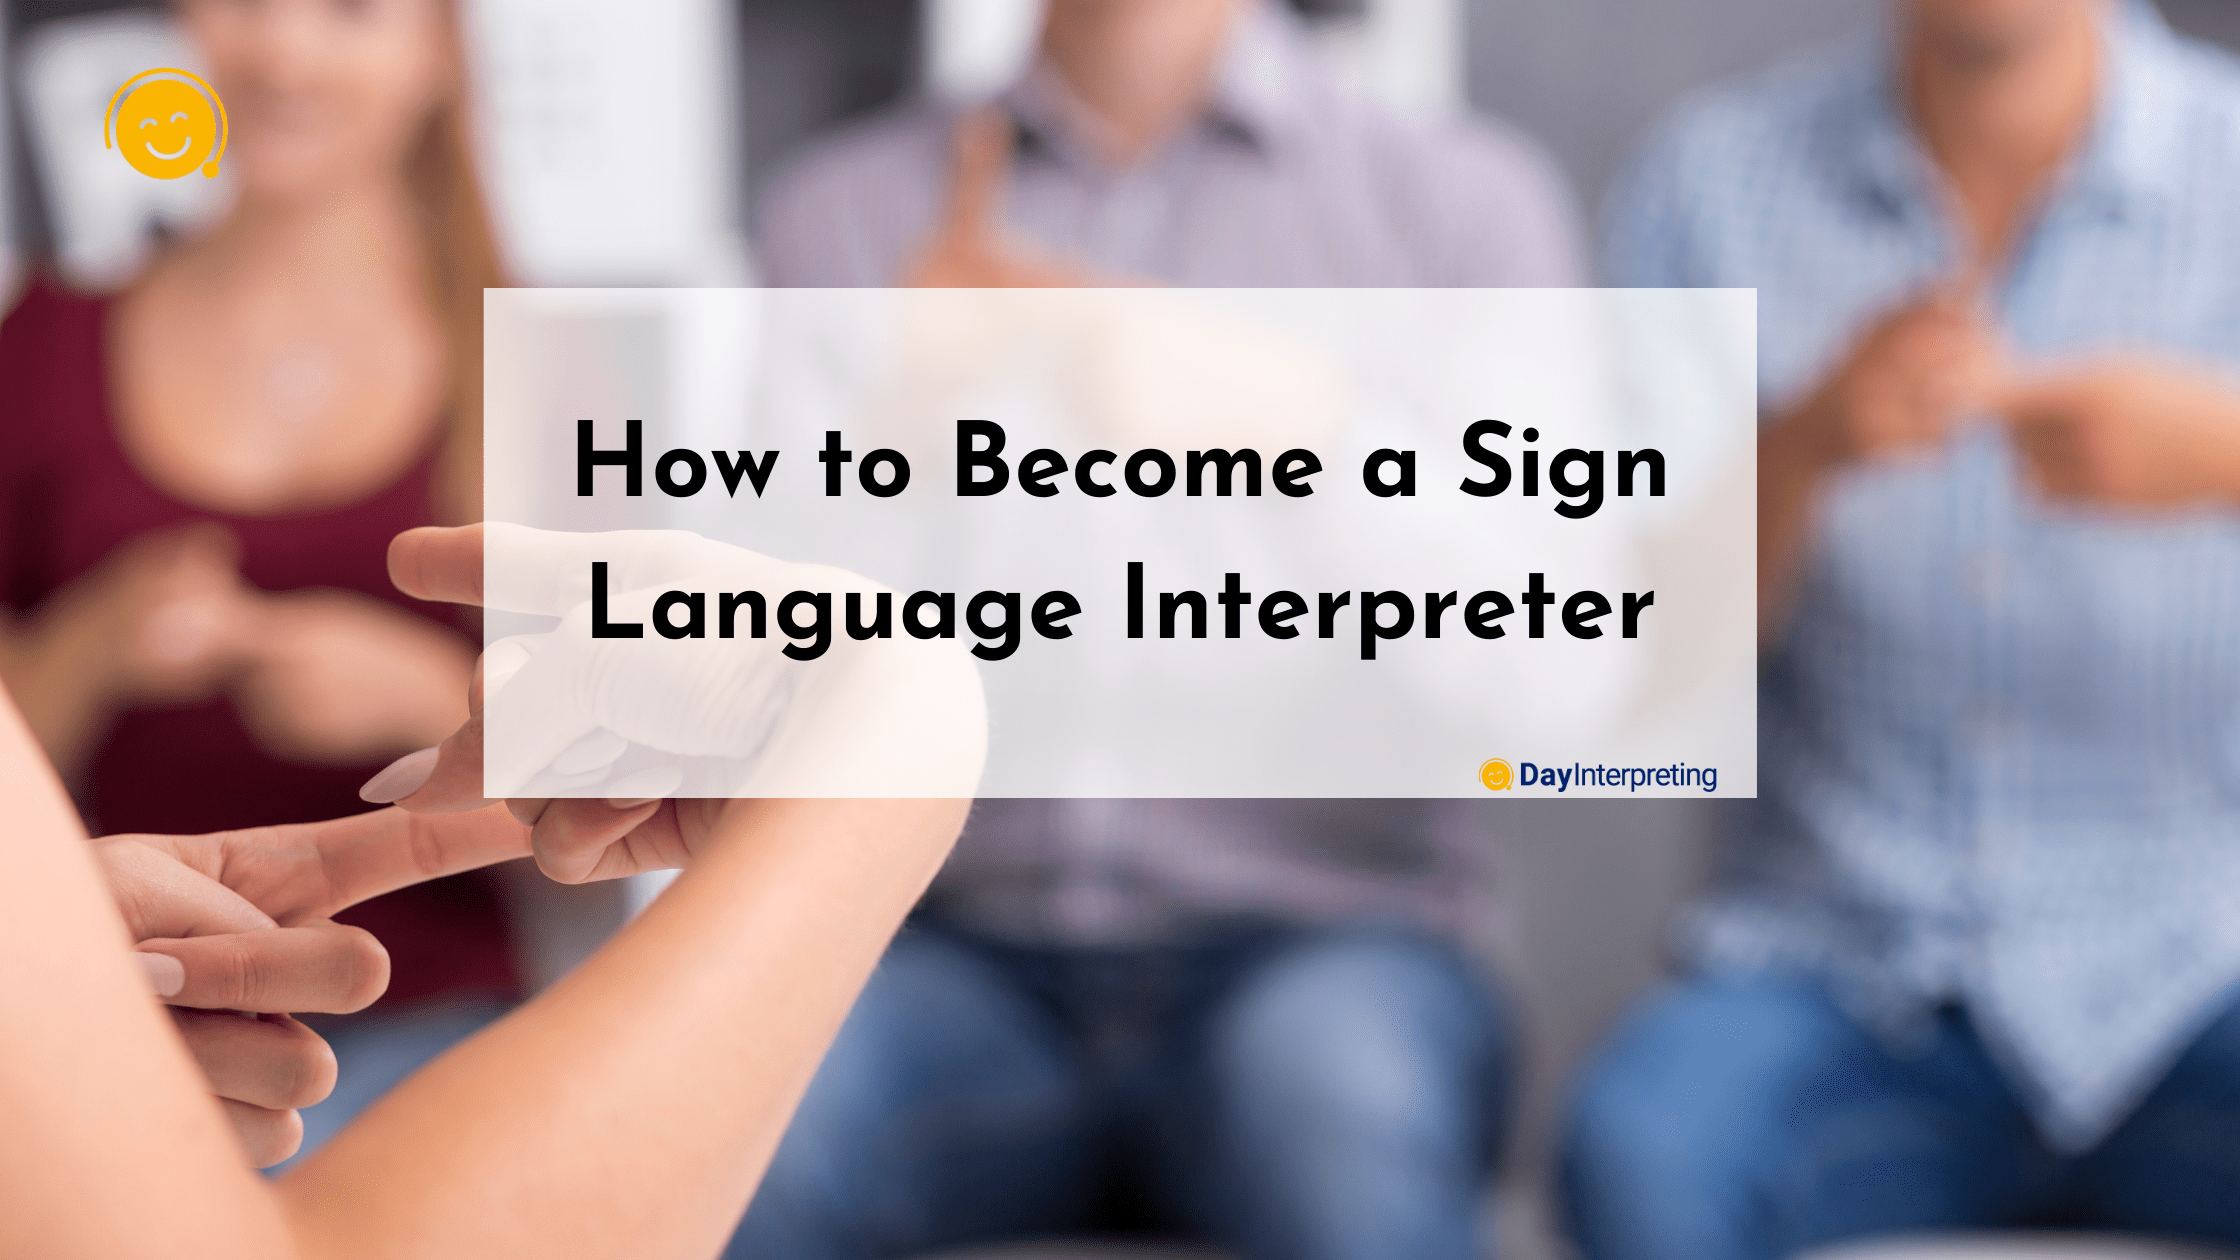 How to Become a Sign Language Interpreter